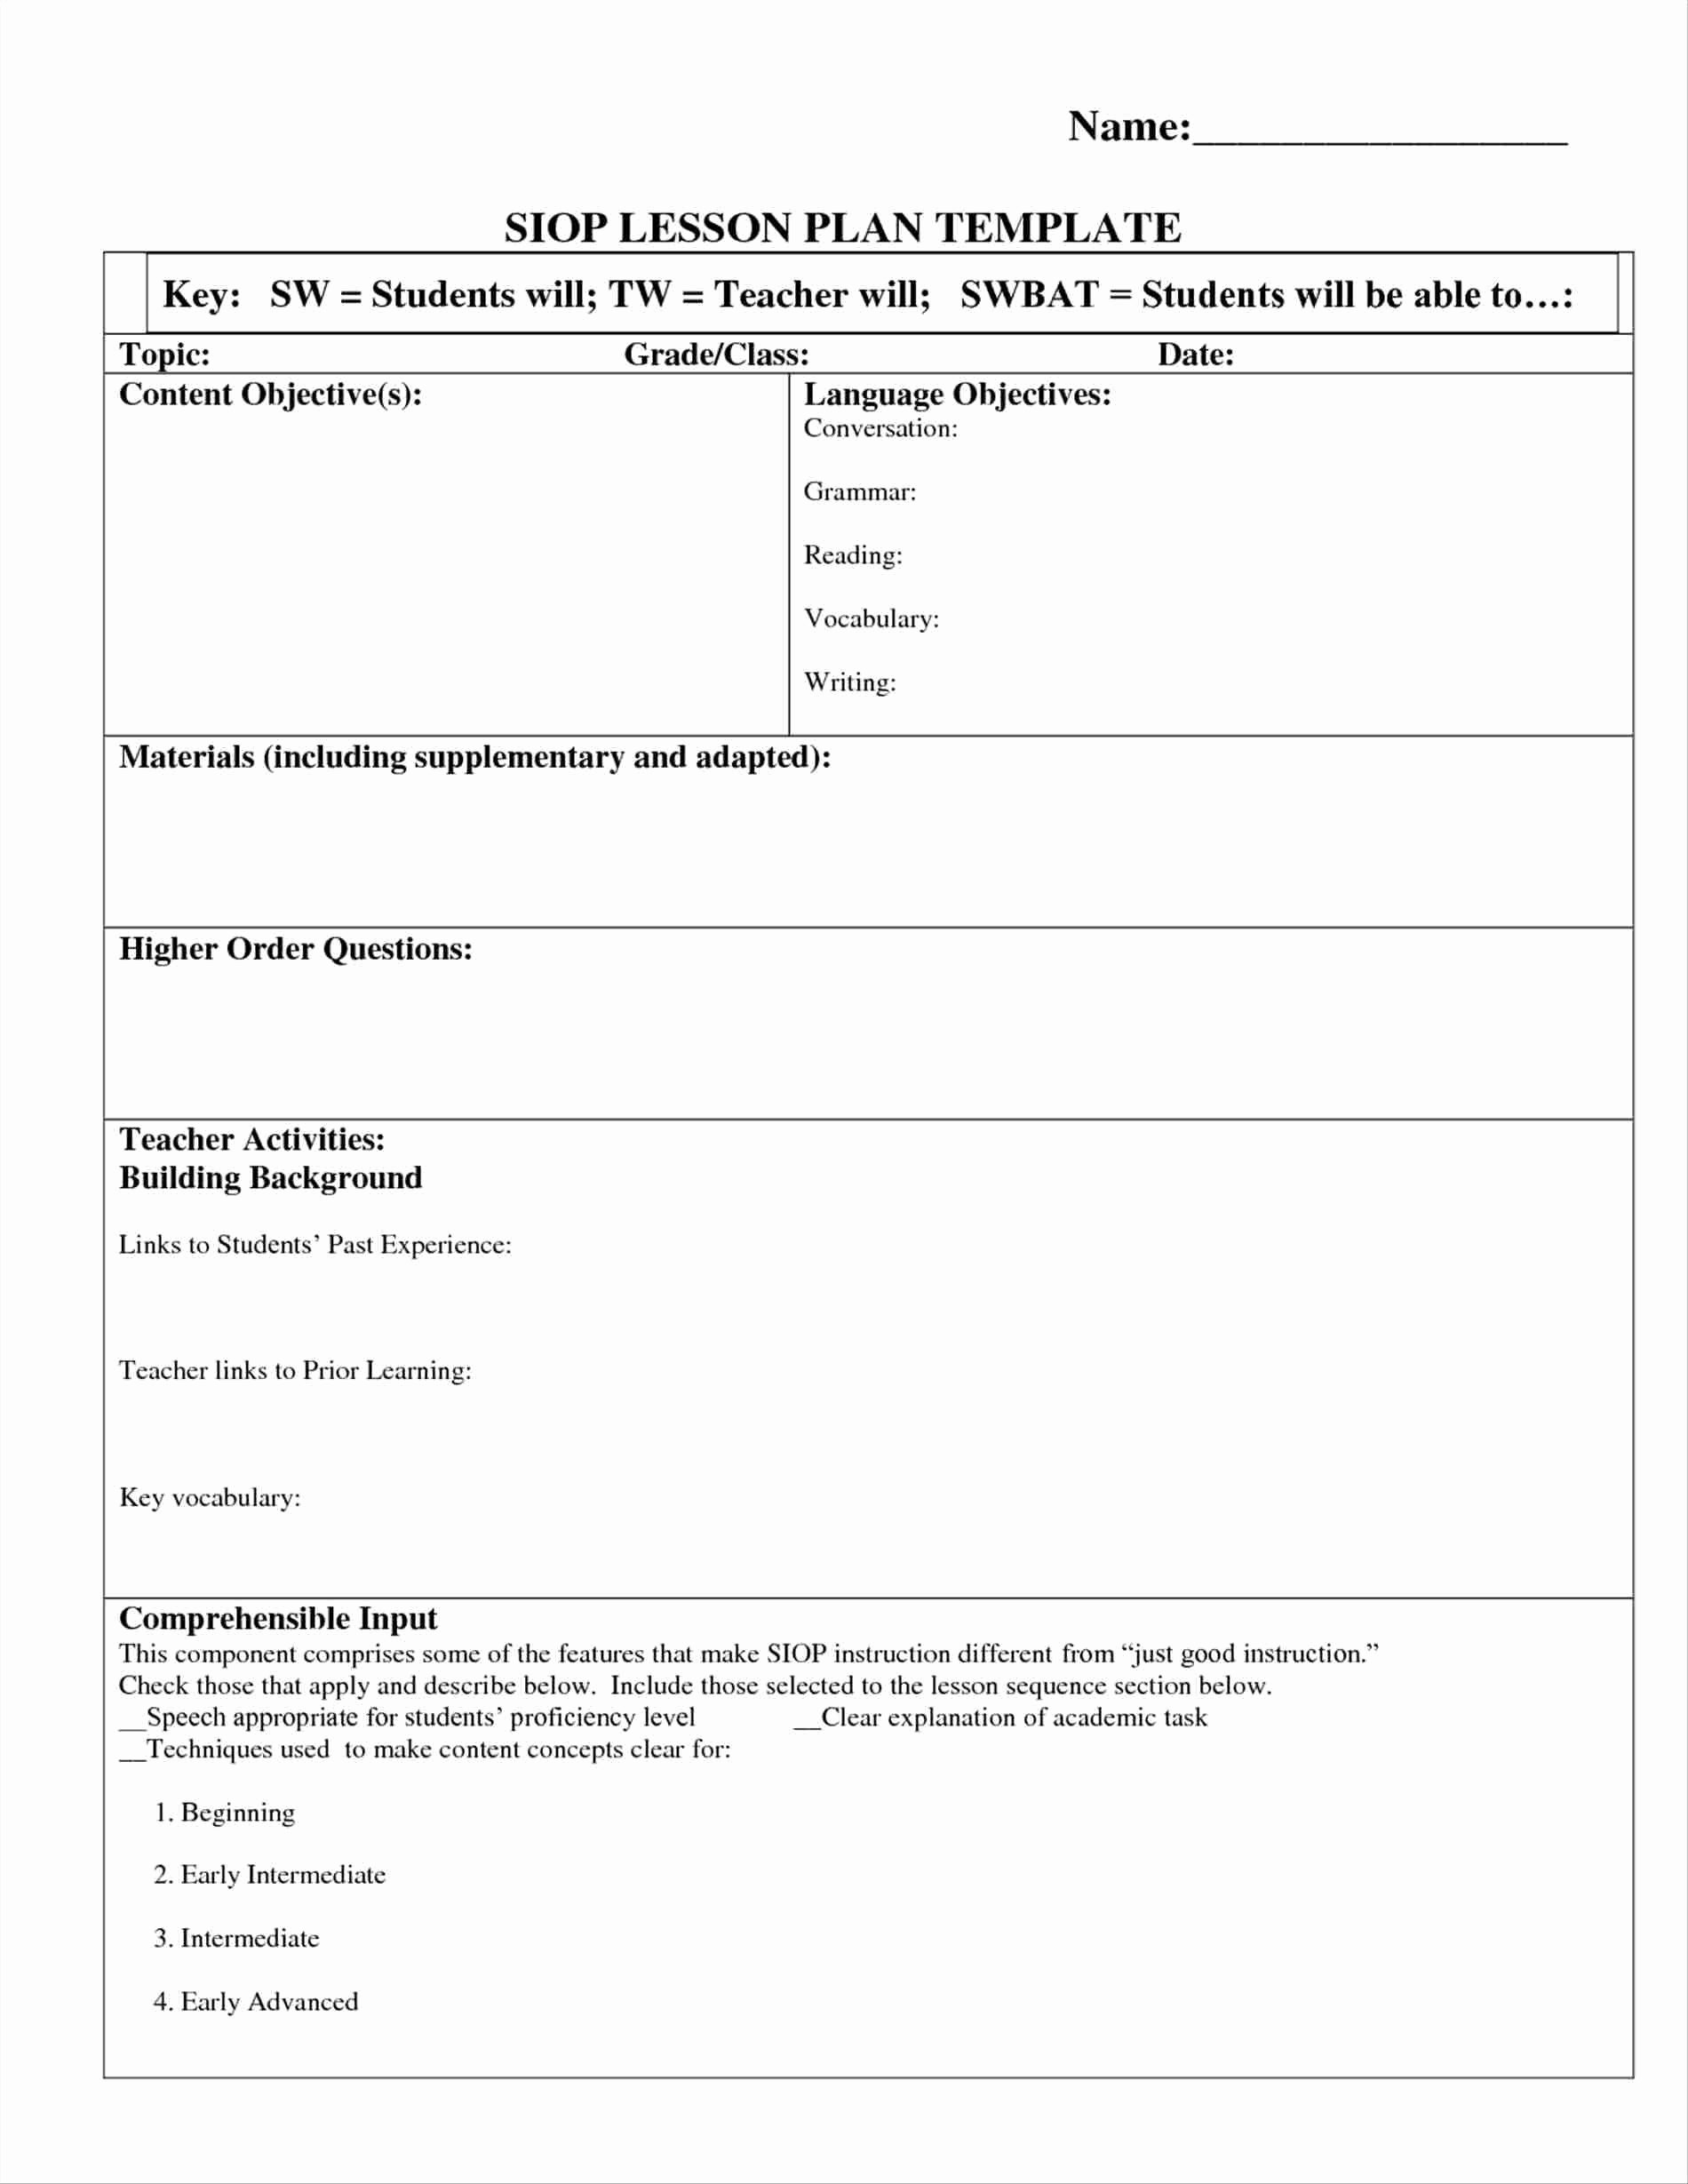 Siop Lesson Plan Template 2 Beautiful Siop Lesson Plan Template 2 Sample – Lesson Plan Template